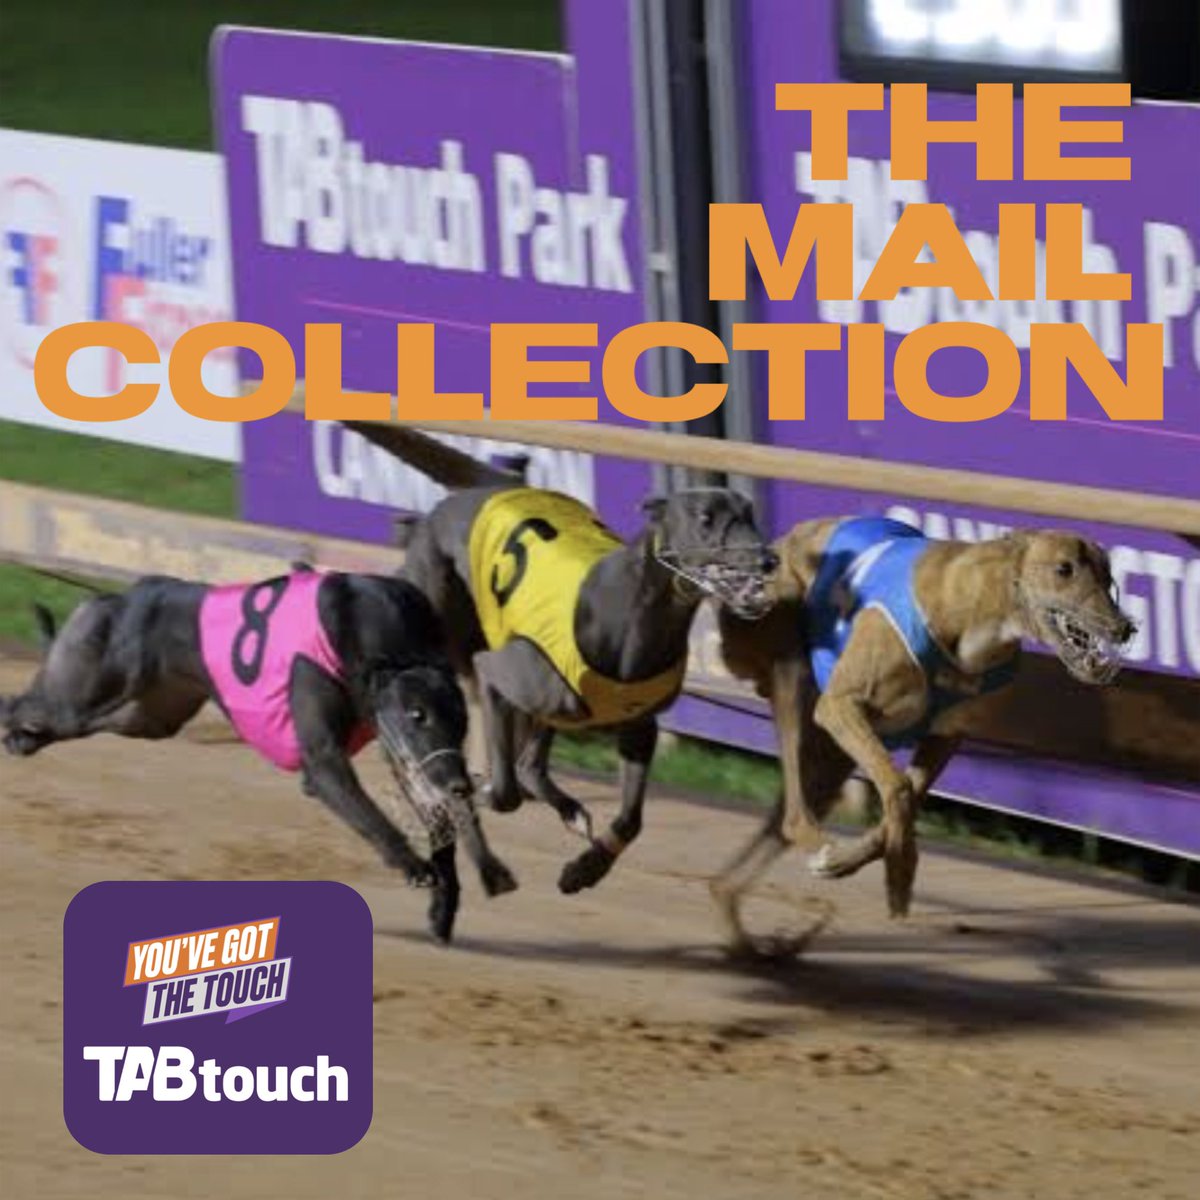 The Mail Collection is back Golden Easter Egg The Miata, Sprinters Plate heats The Meadows Geelong cup meeting and all the usual segments Thanks to @TAB_touch @Shortte @ethansgreys on.soundcloud.com/JxPjHbawrBtc94… open.spotify.com/episode/0IHVOi…